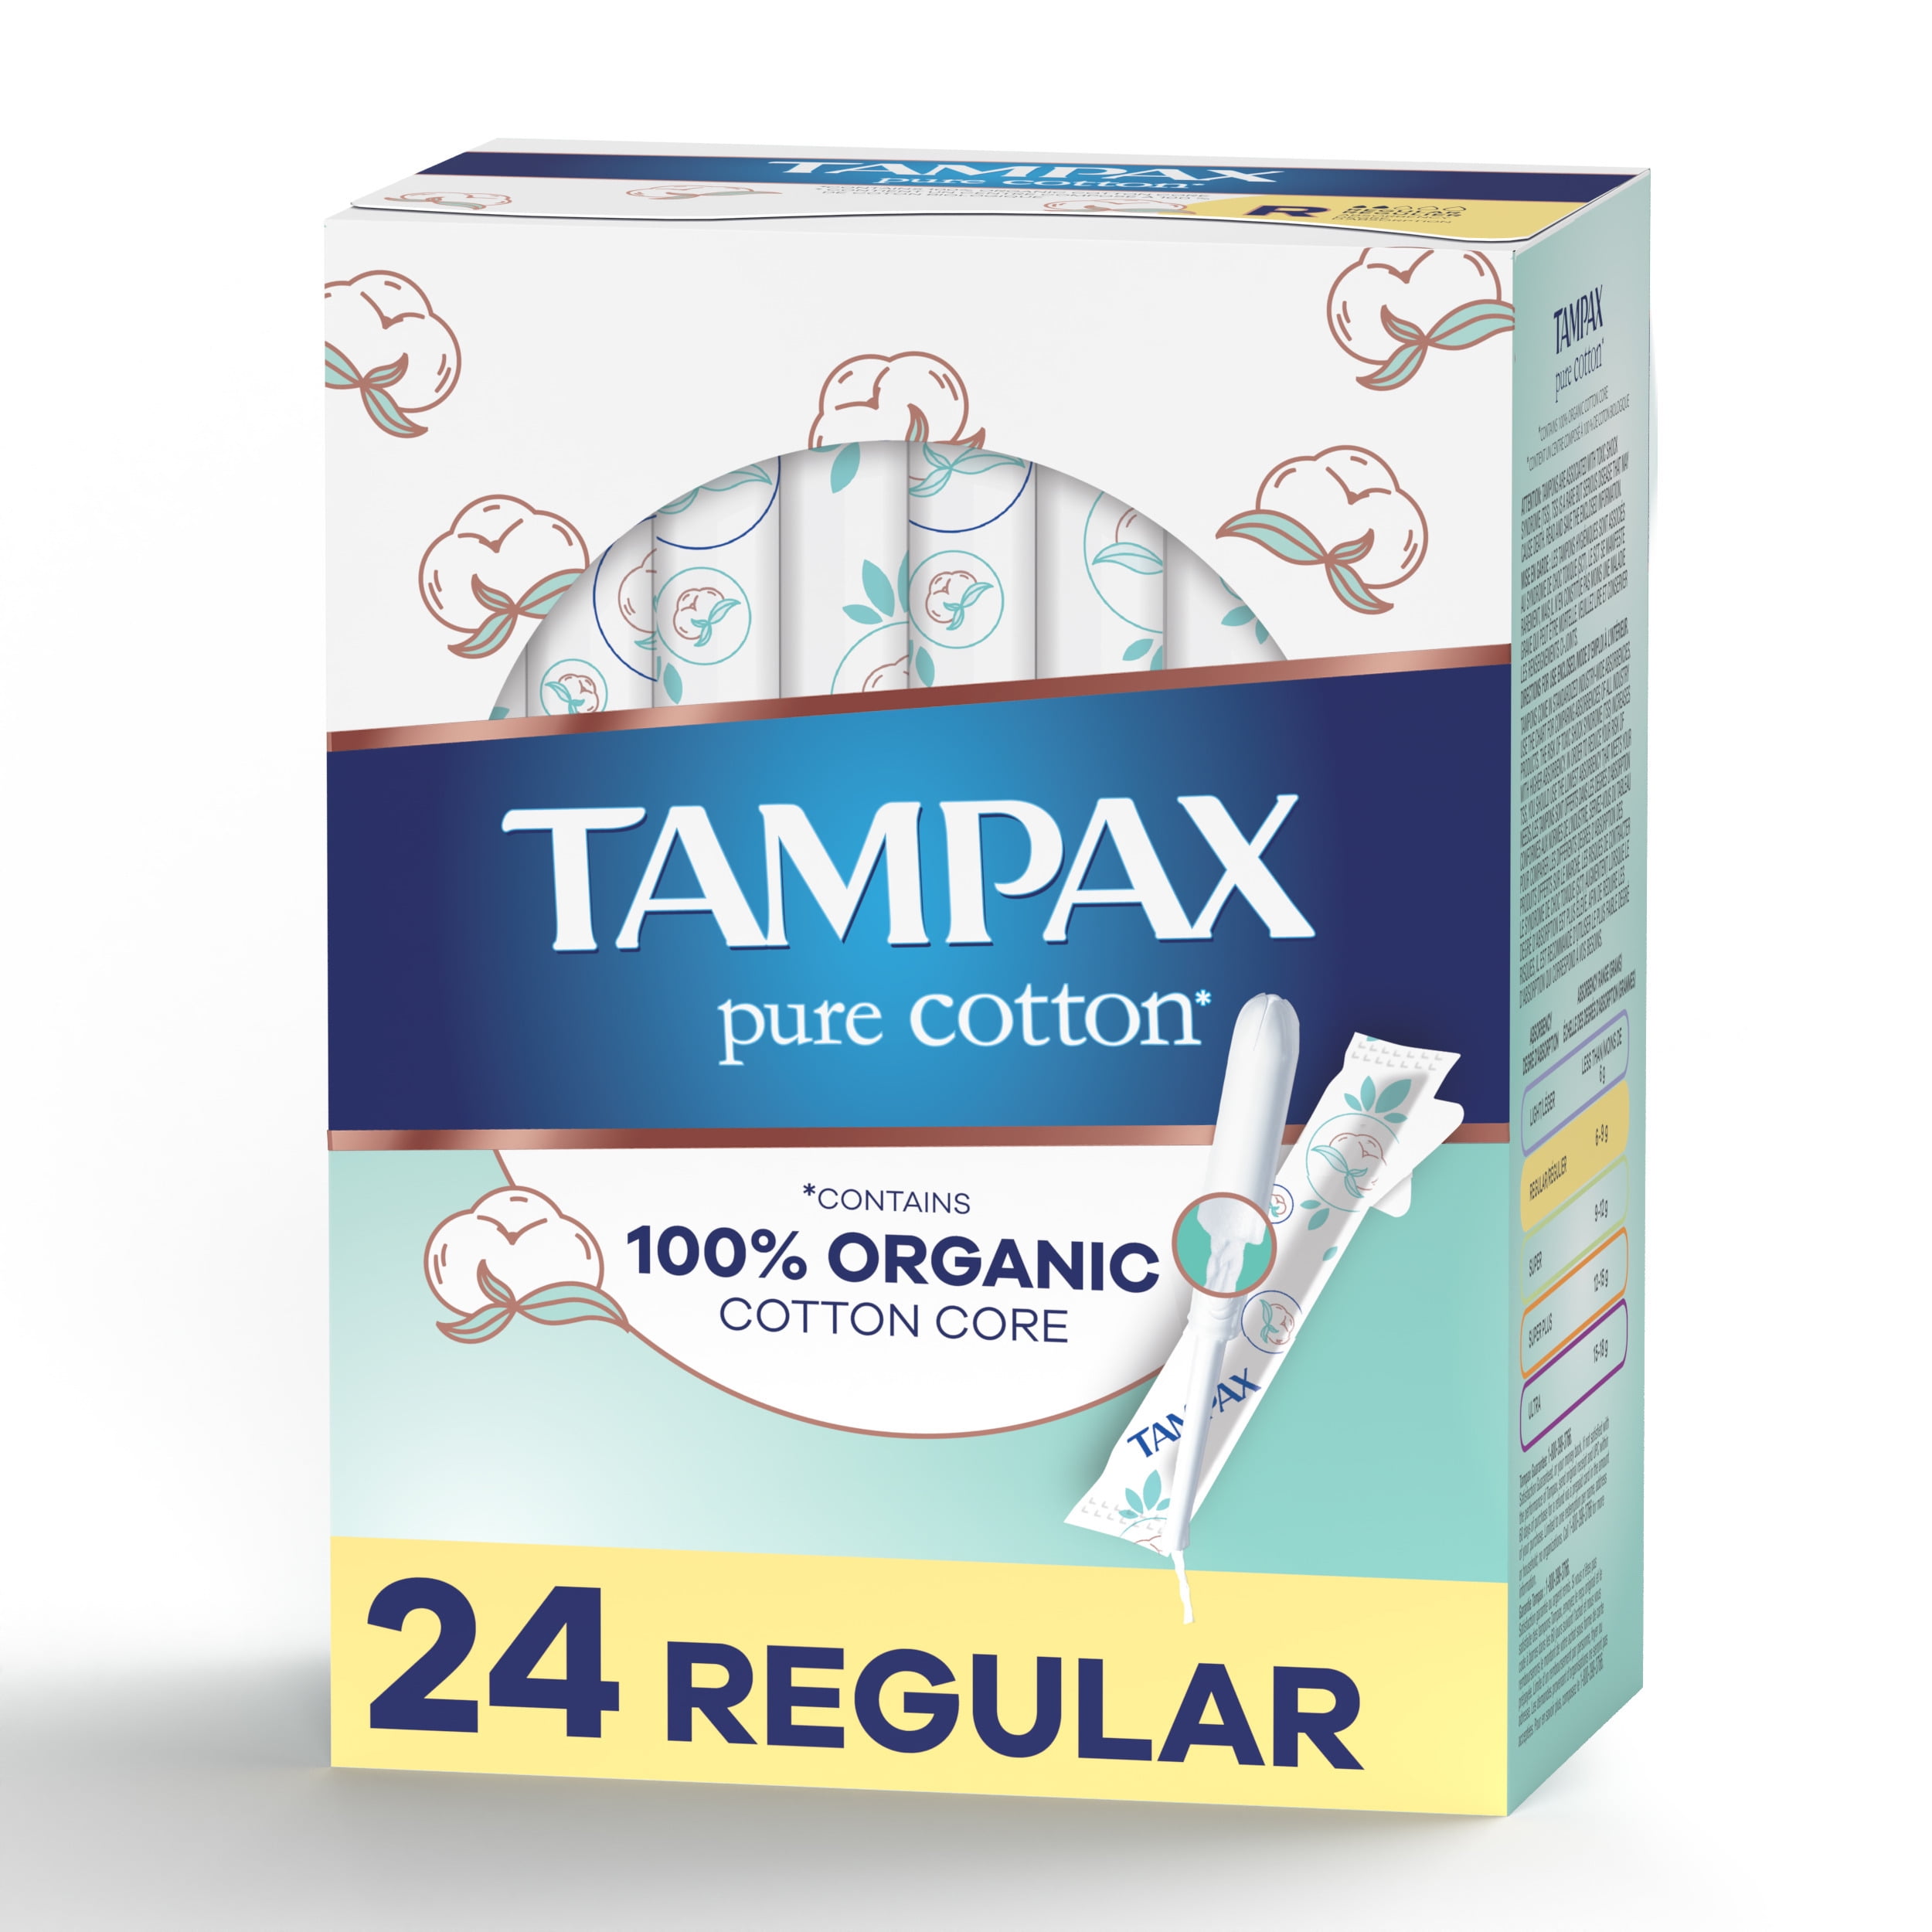 Tampax Pure Cotton Tampons, Contains 100% Organic Core, Regular Absorbency, 24 Ct, Unscented - Walmart.com